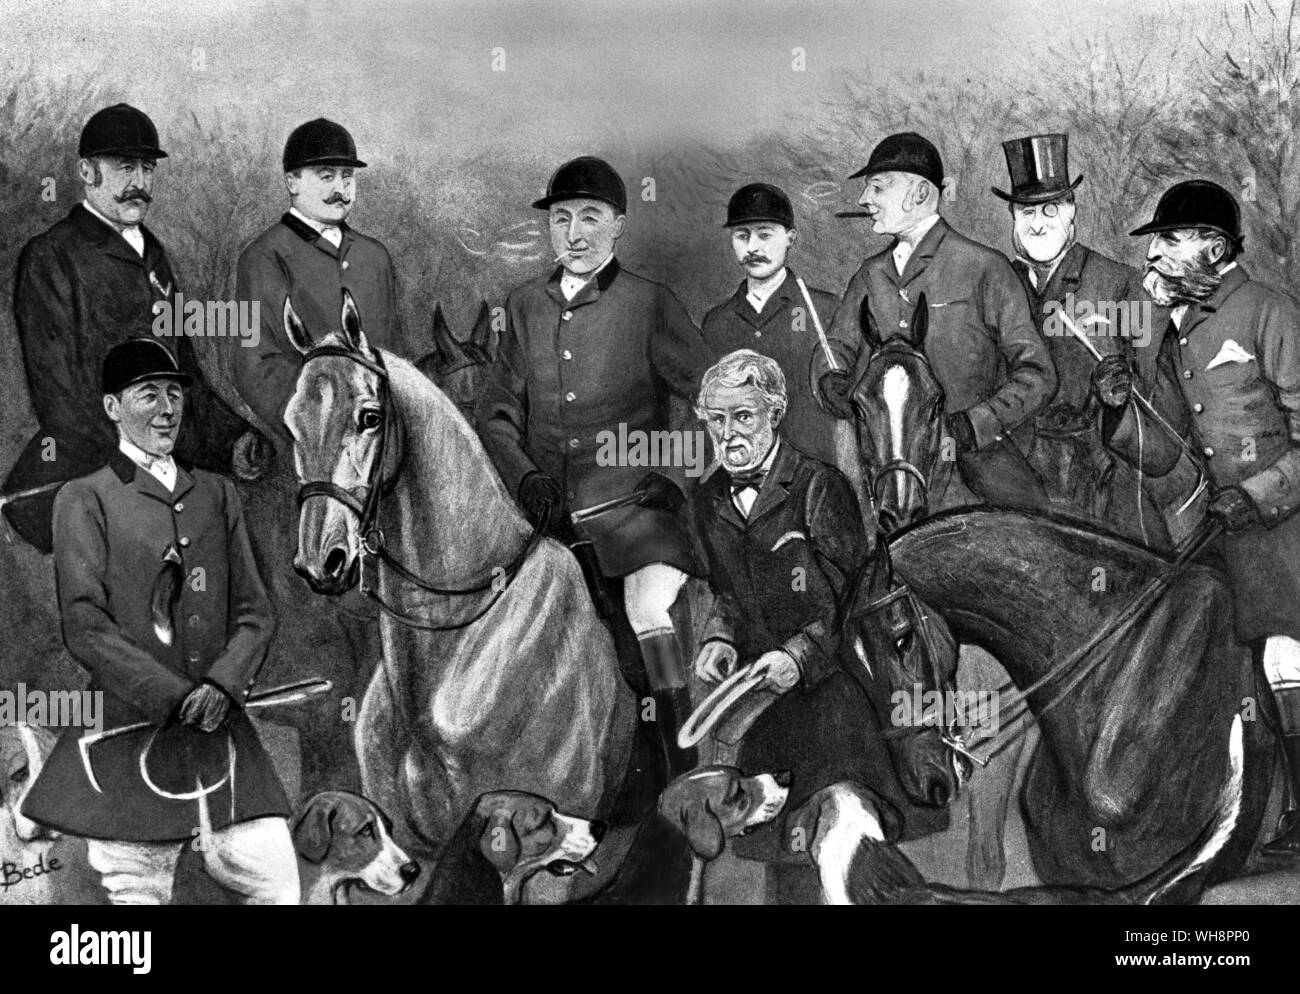 A Foxhunting Constellation. On horseback: the 9th Duke of Beaufort, Mr George Charles Wentworth Fitzwilliam, Sir Gilbert Greenall, first outside master of the Belvoir since Lord Forester, the 4th Earl of Yarborough, the 5th Earl of Lonsdale, Mr Henry Chaplin (later first Viscount Chaplin), the 8th Earl of Harrington. Standing: Ben Chapell, Belvoir huntsman from 1896 to 1912 and the 7th Duke of Rutland. Stock Photo